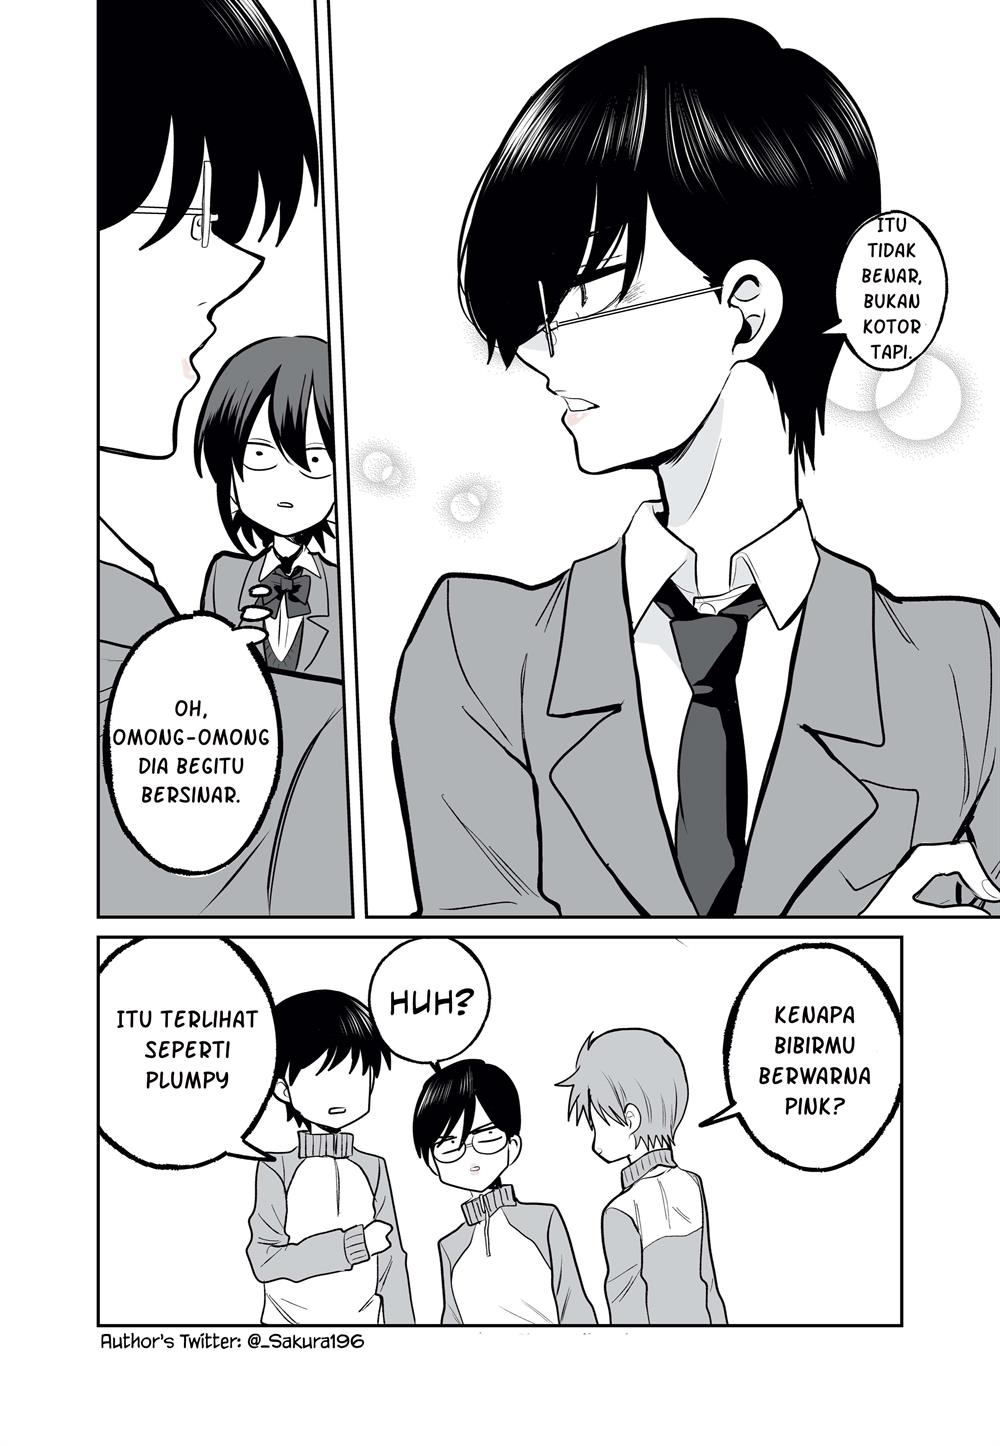 The Boy with Glasses Never Gets Flirty Chapter 00